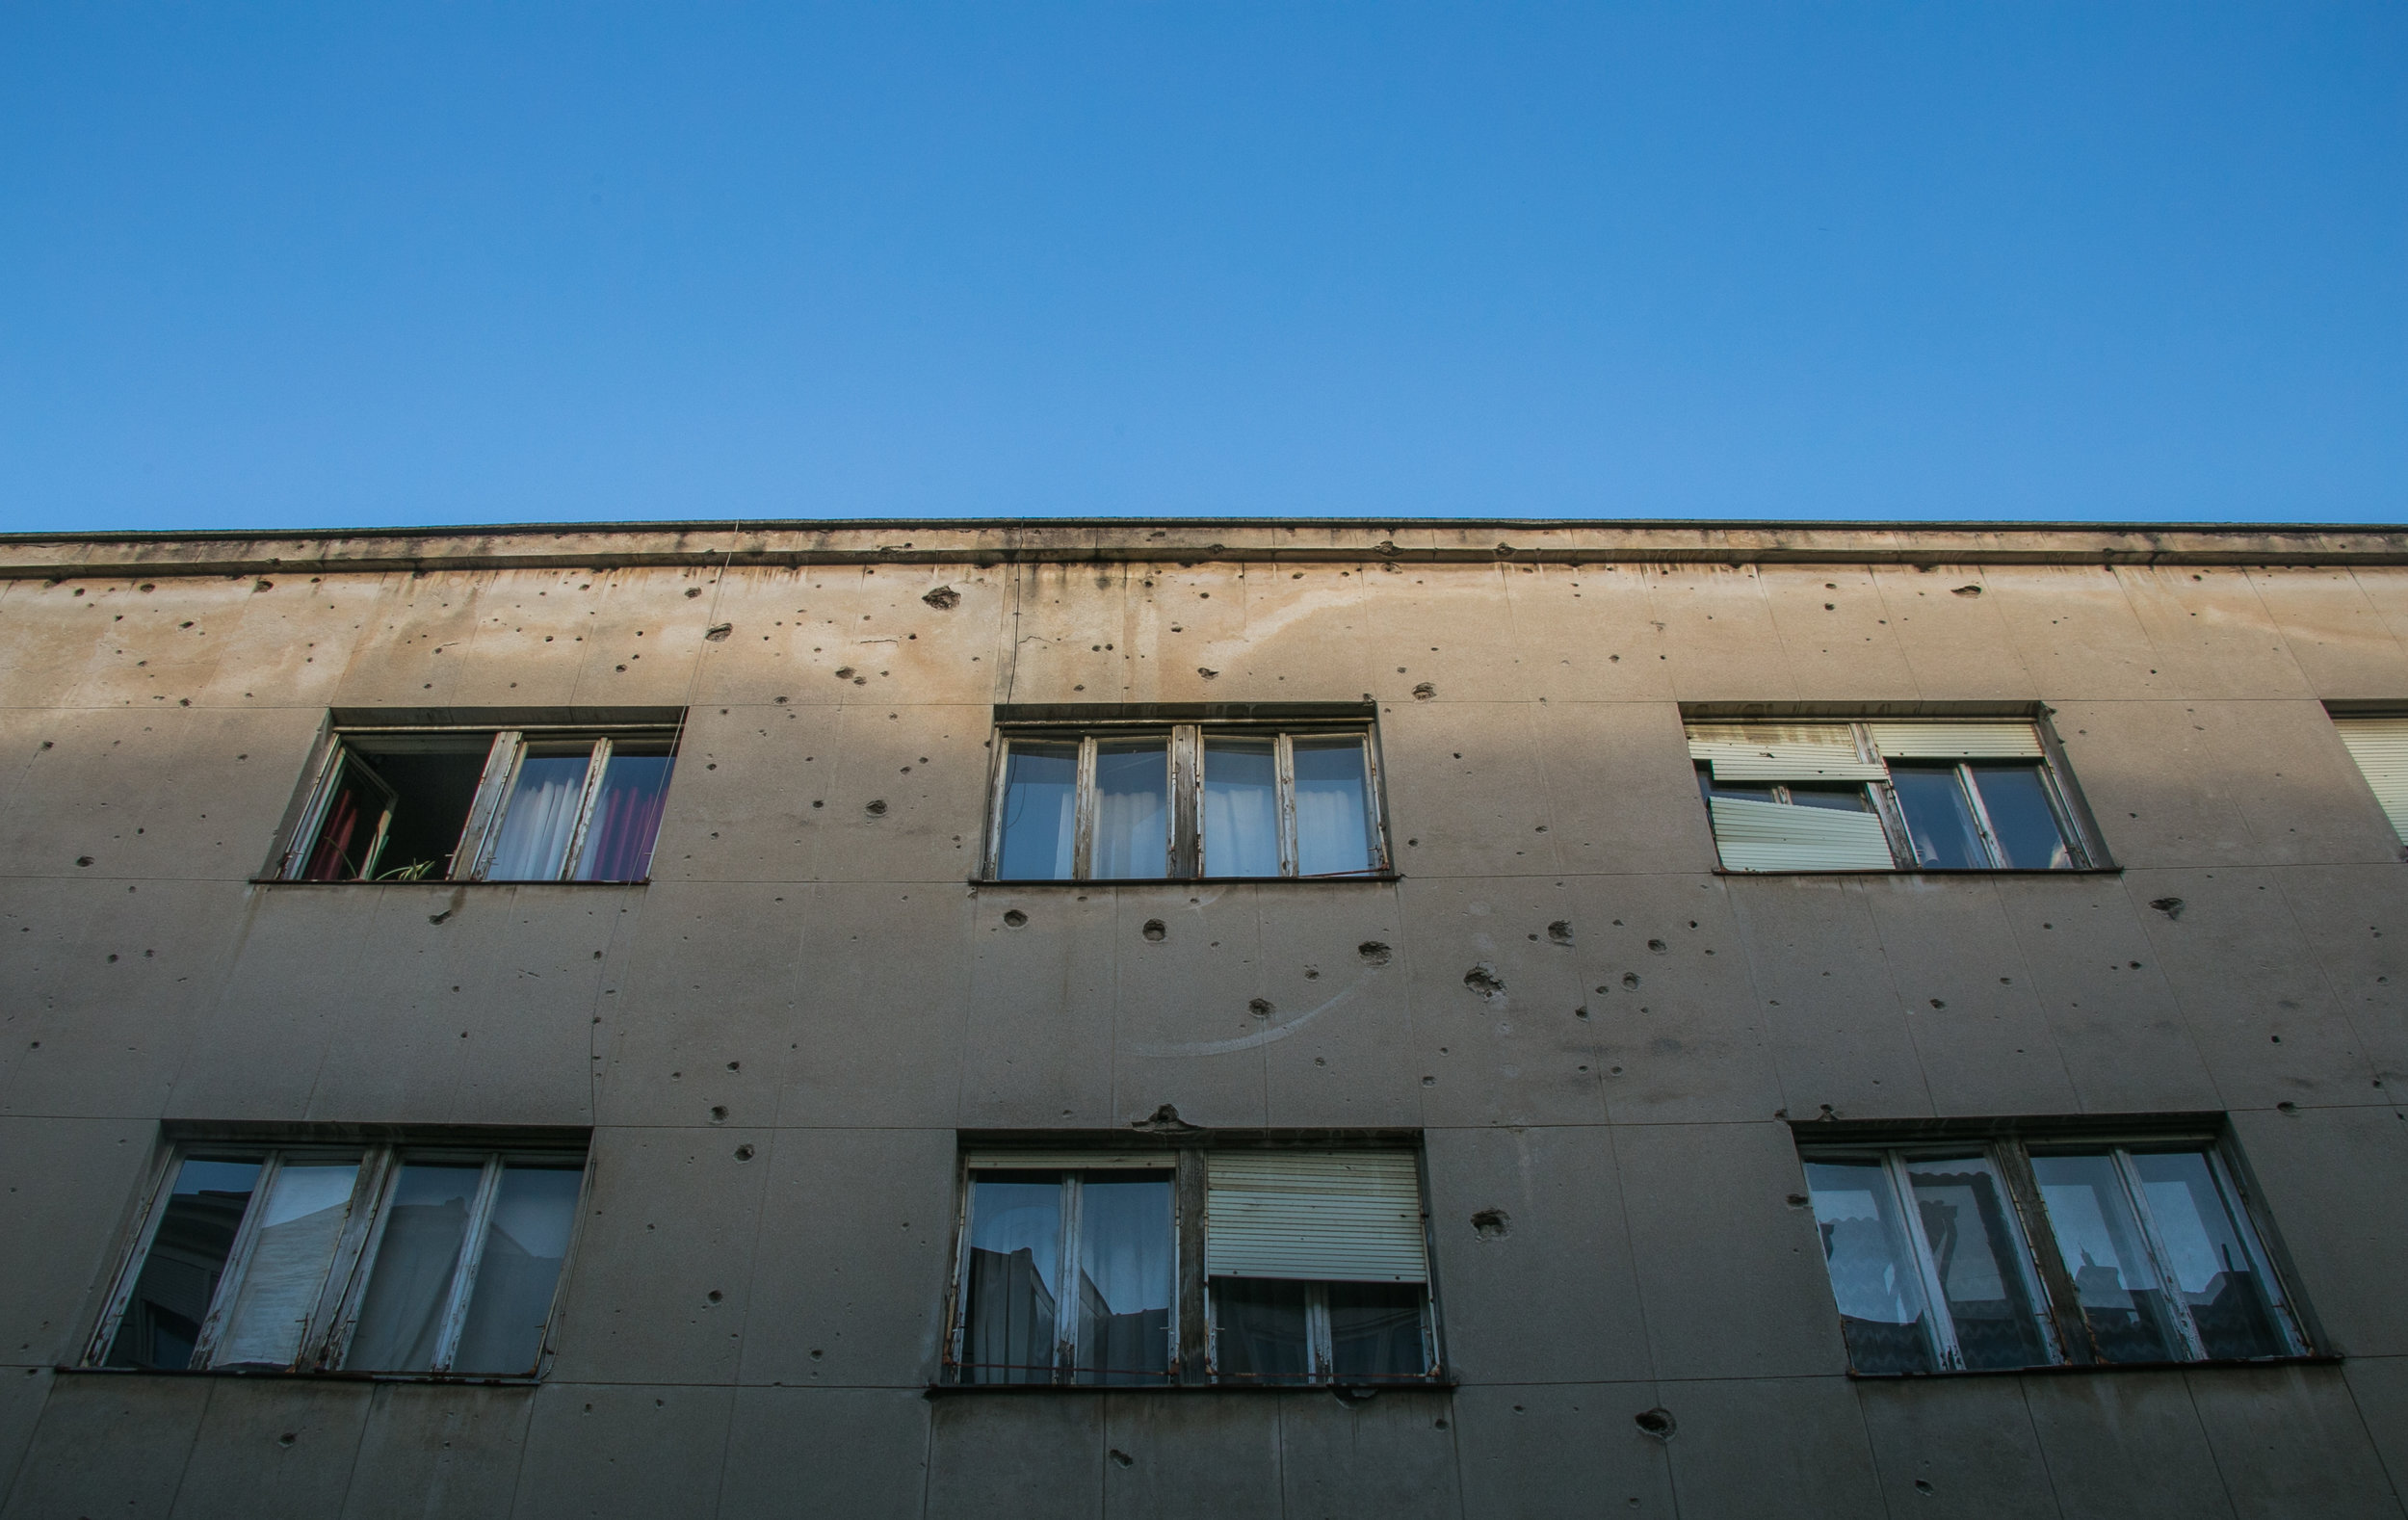  Bullet holes riddle the side of an apartment building in Mostar, Bosnia. The city served as a battle front between Croatian and Republic of Bosnia forces (just one of many racial battles) during the much larger Bosnian War. The two sides battled for